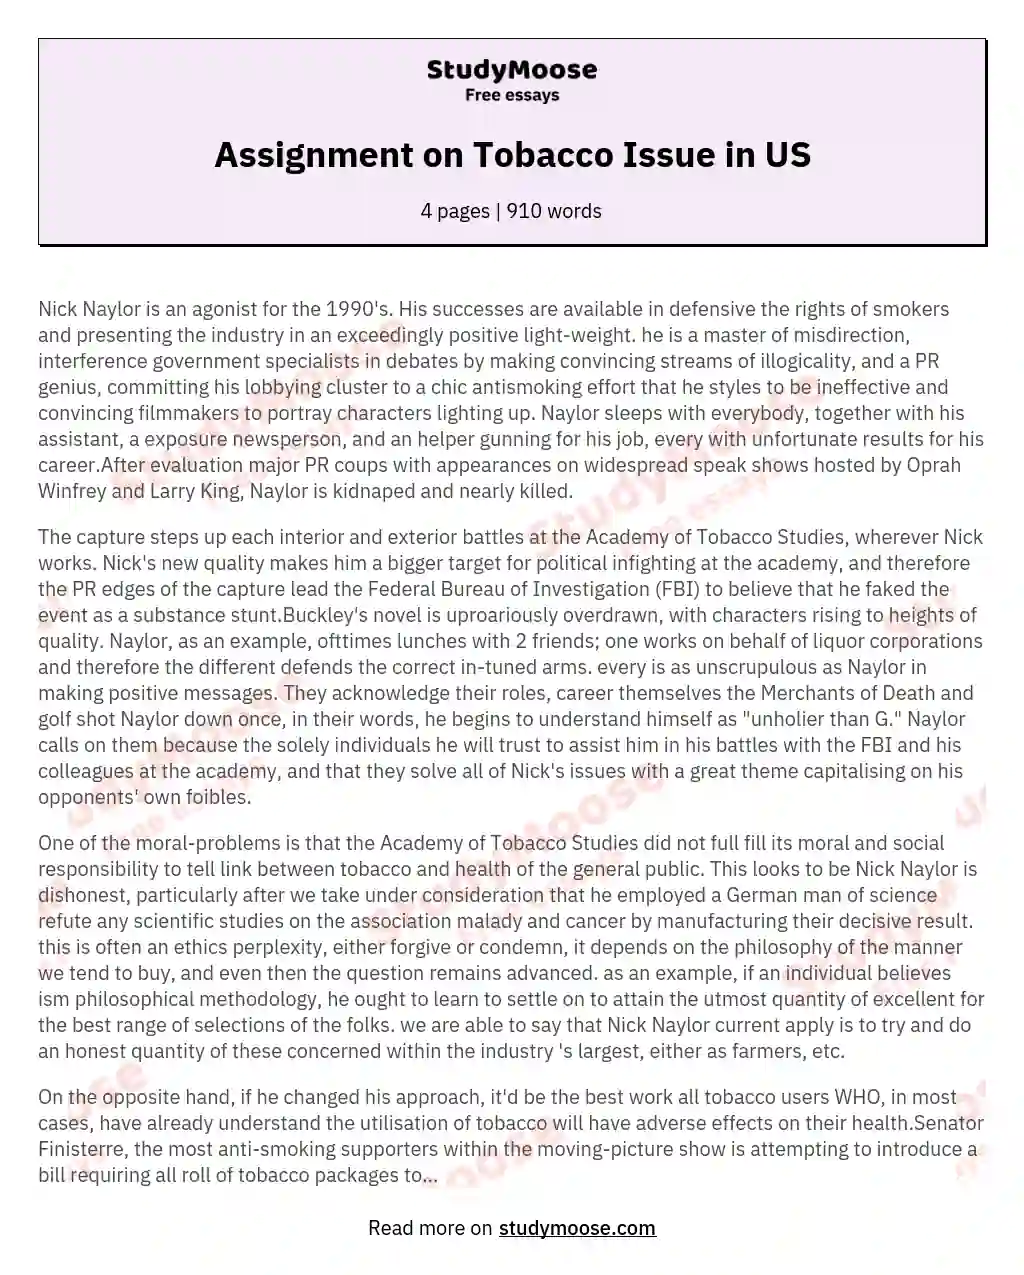 Assignment on Tobacco Issue in US essay